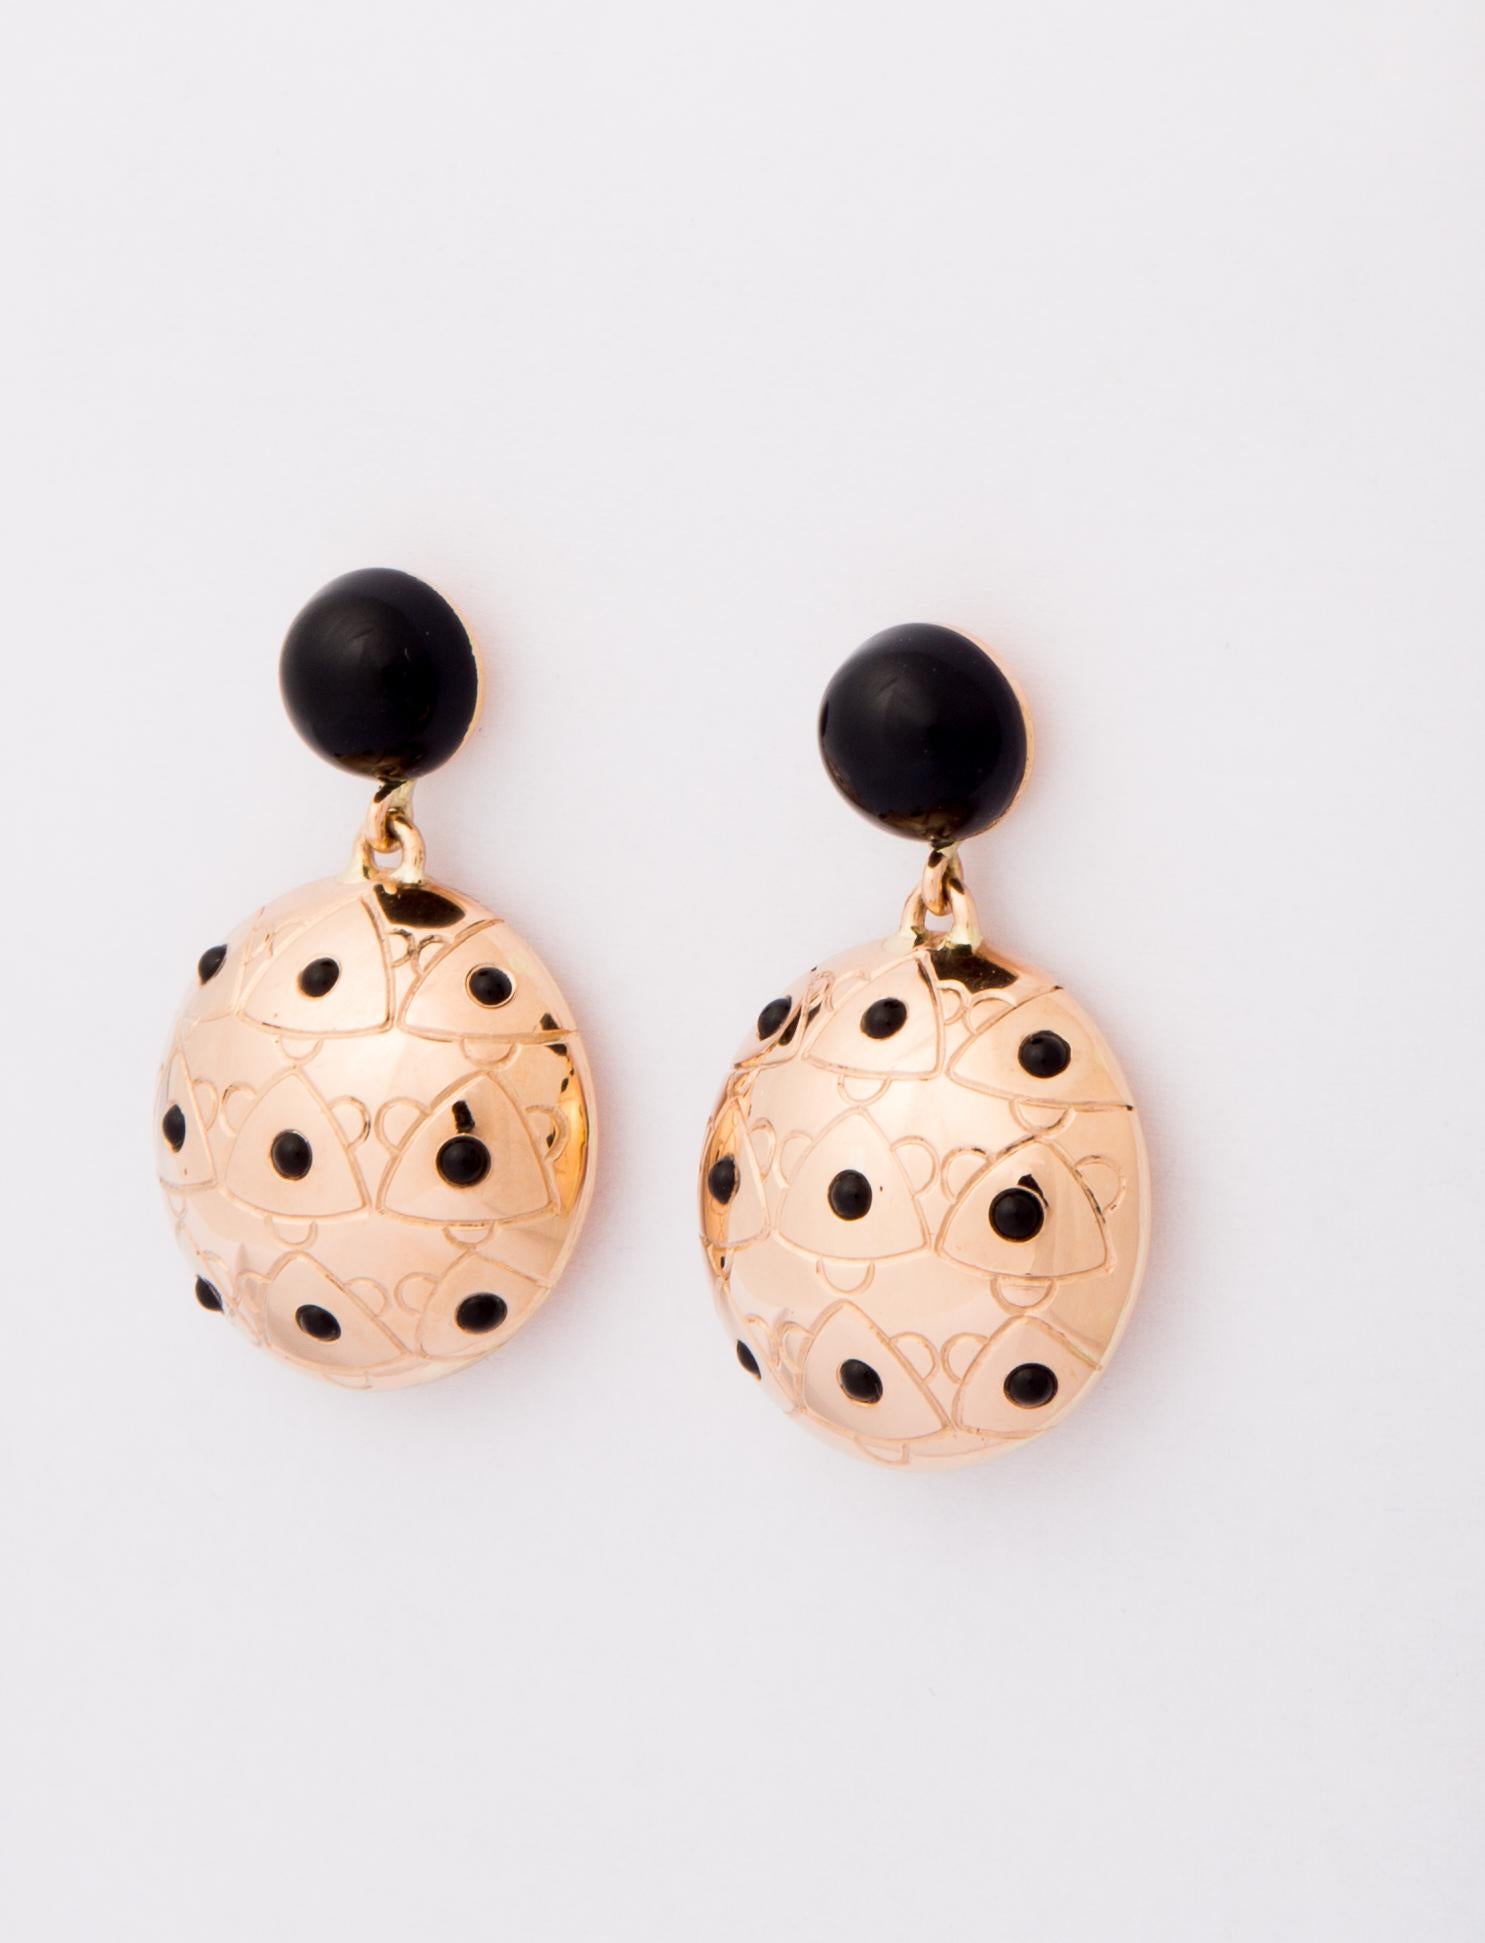 Earrings as Sea Urchin
Onyx and Gold 18K
comes with studs (can be changed to clips)